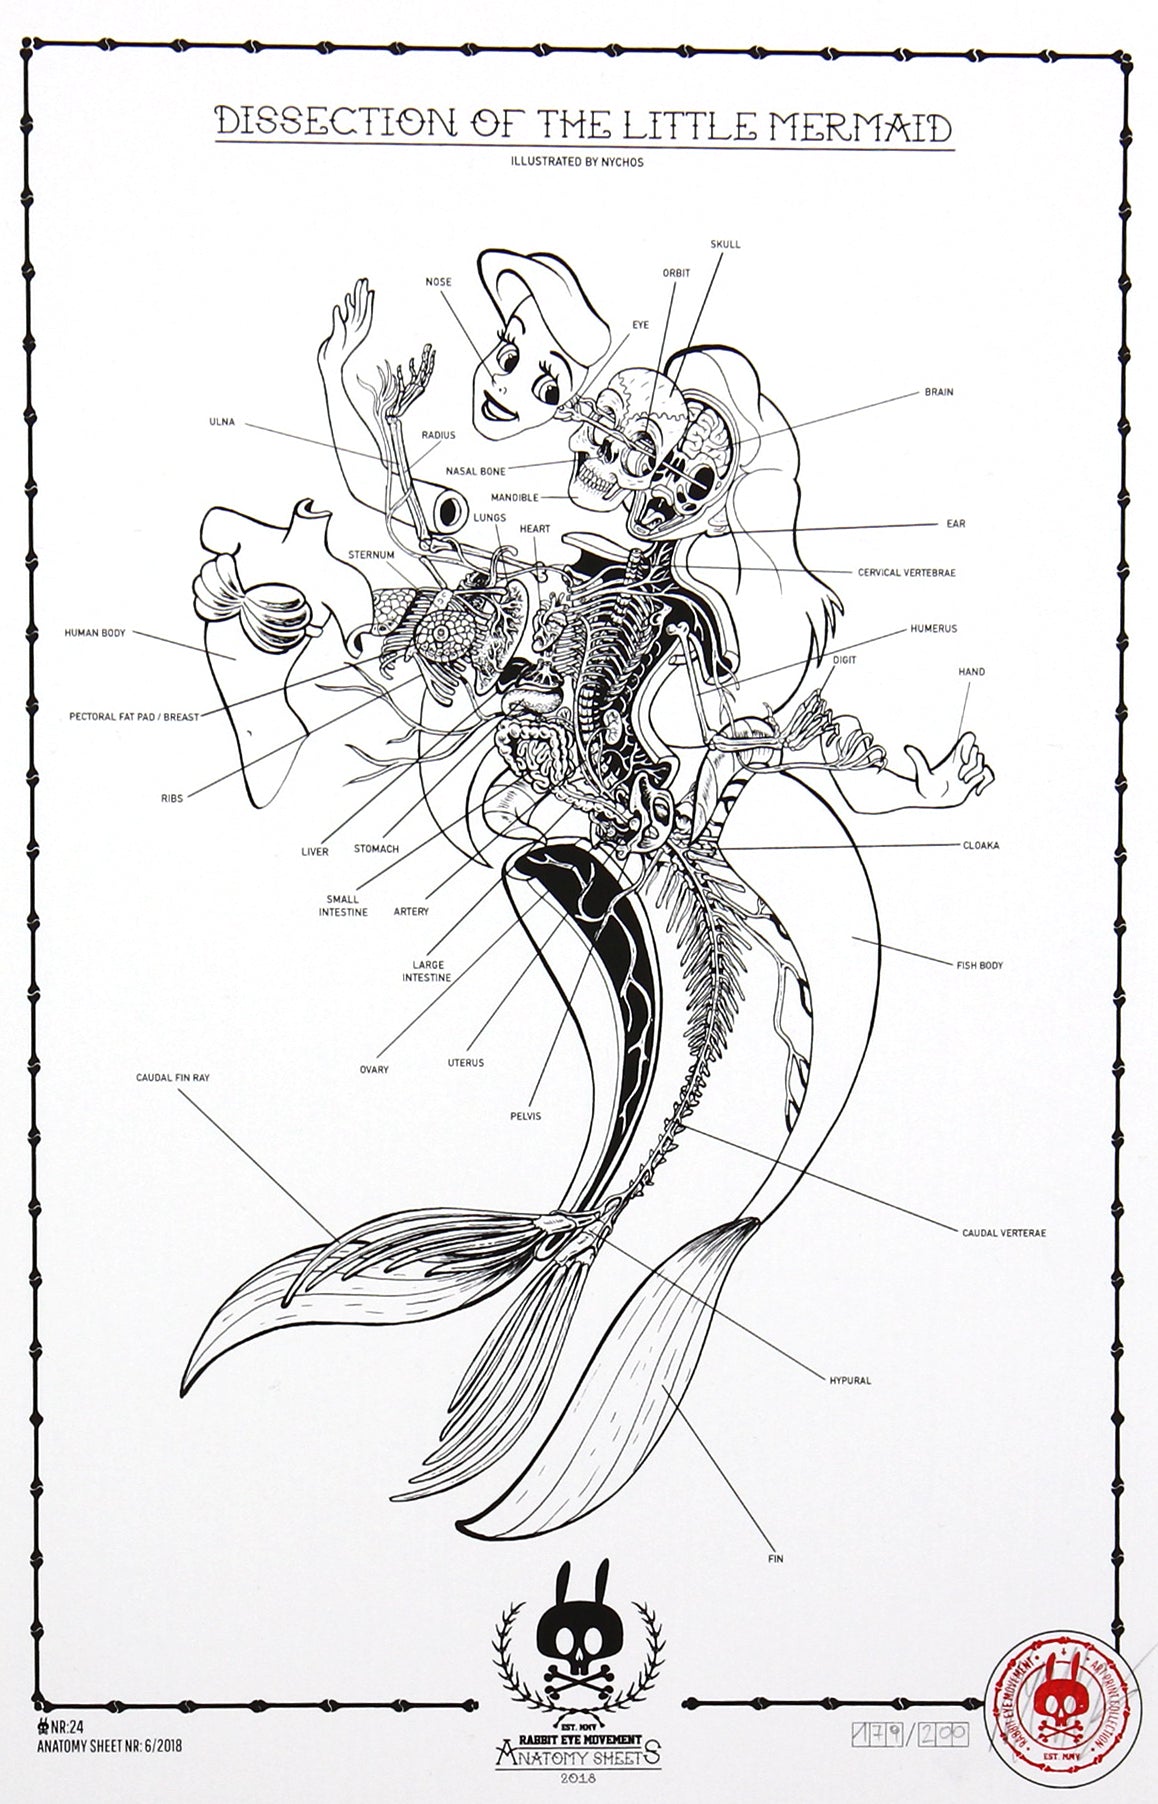 DISSECTION OF THE LITTLE MERMAID - ANATOMY SHEET NO. 24